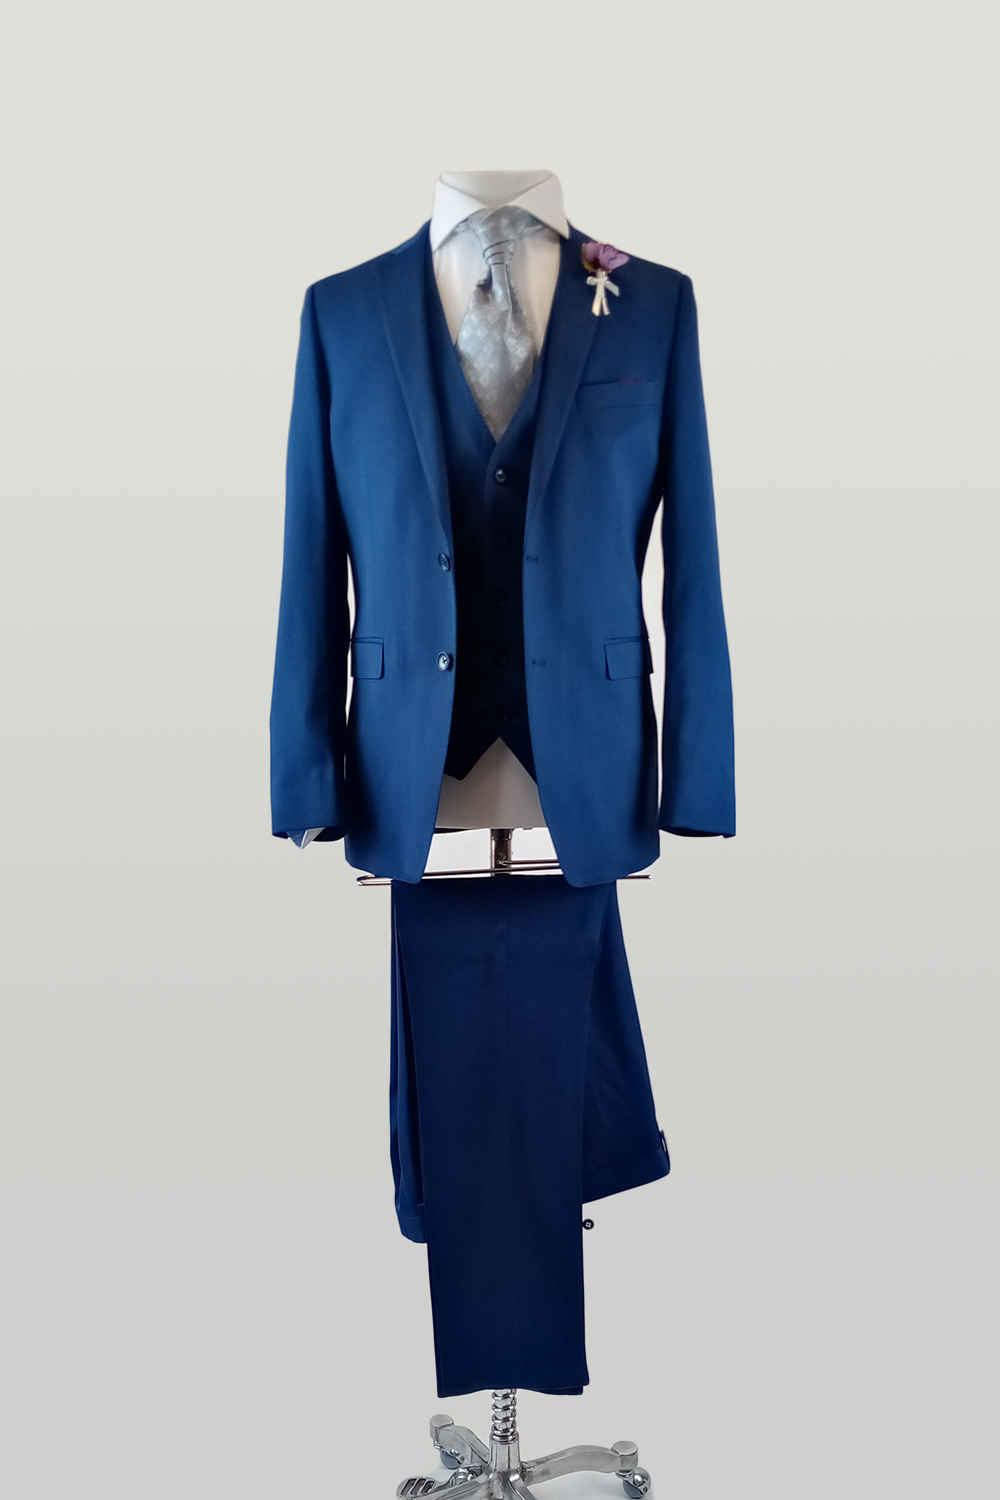 Azure 3 Piece Electric Blue Suit - Tom Murphy's Formal and Menswear